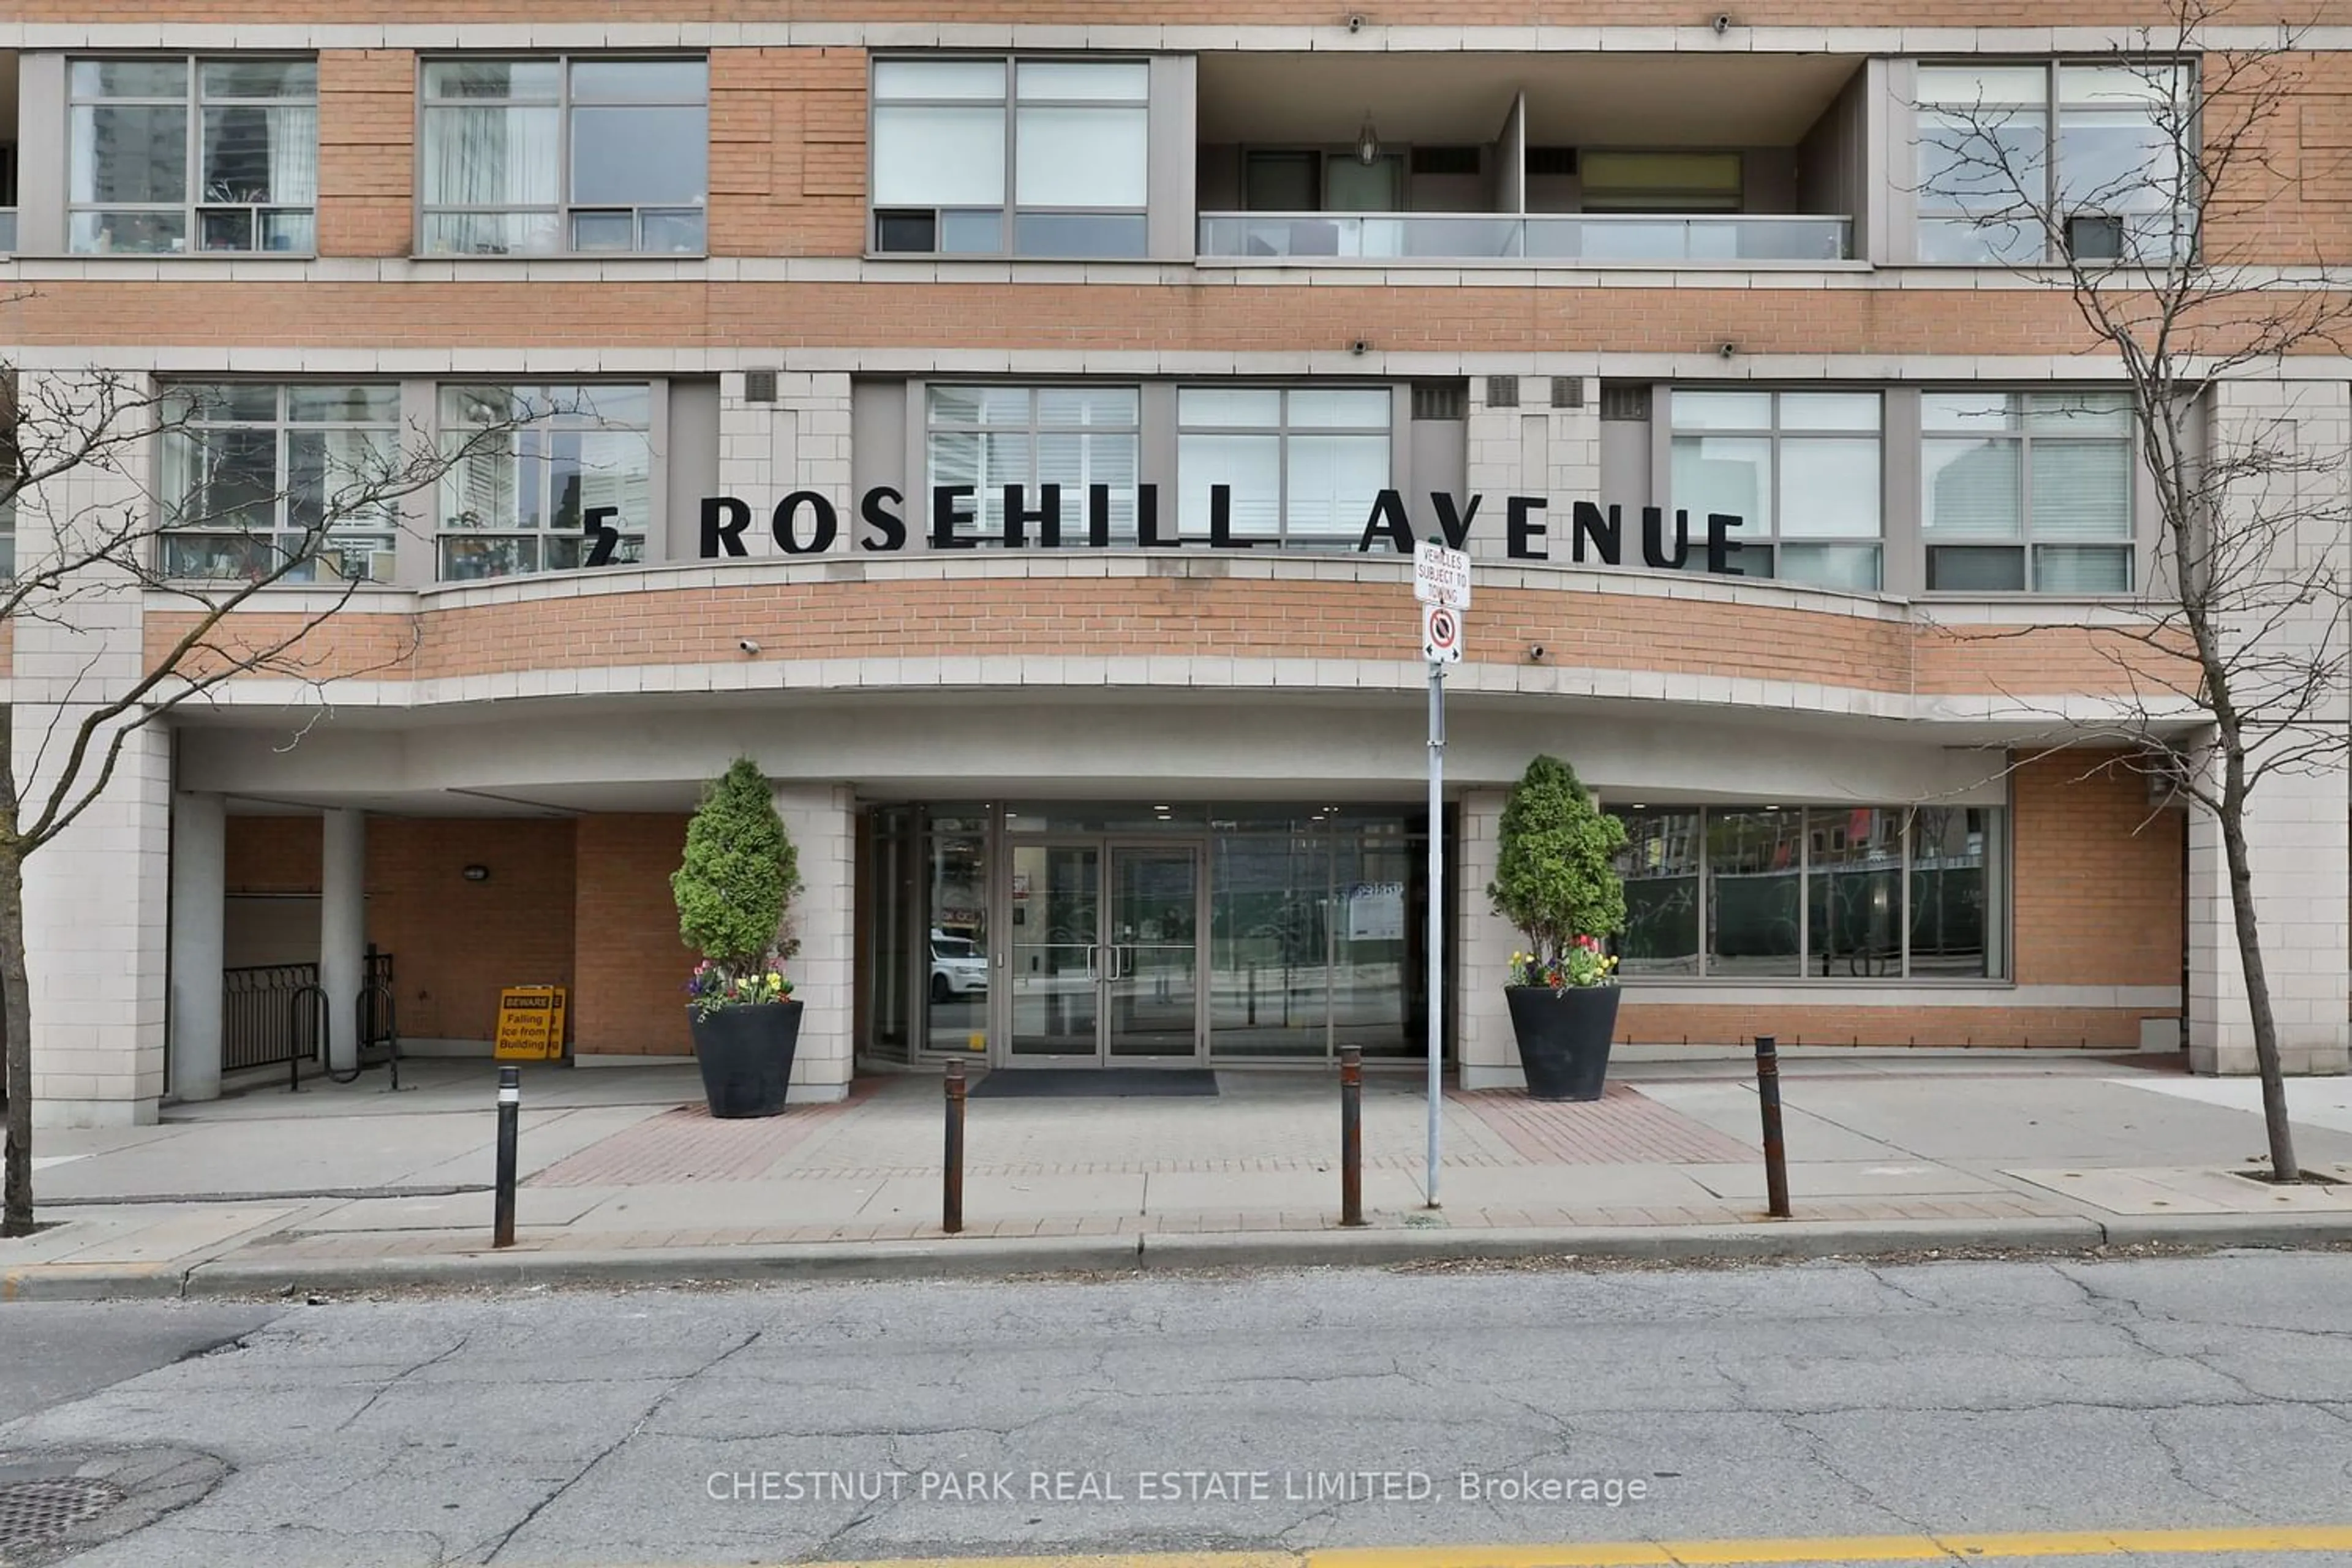 Street view for 5 Rosehill Ave #617, Toronto Ontario M4T 3A6